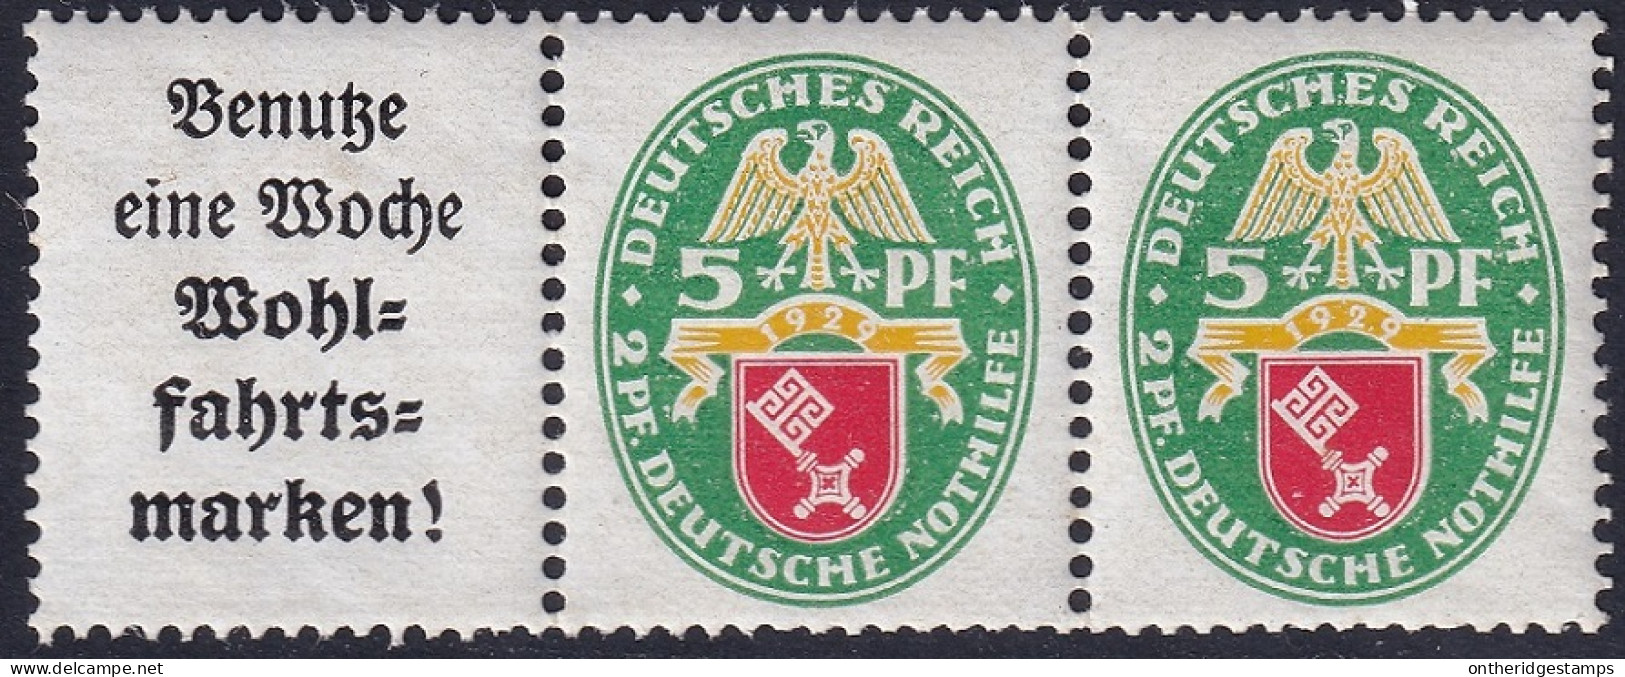 Germany 1929 Sc B28a Deutschland Mi W35 Pair & Label From Booklet MNH** - Carnets